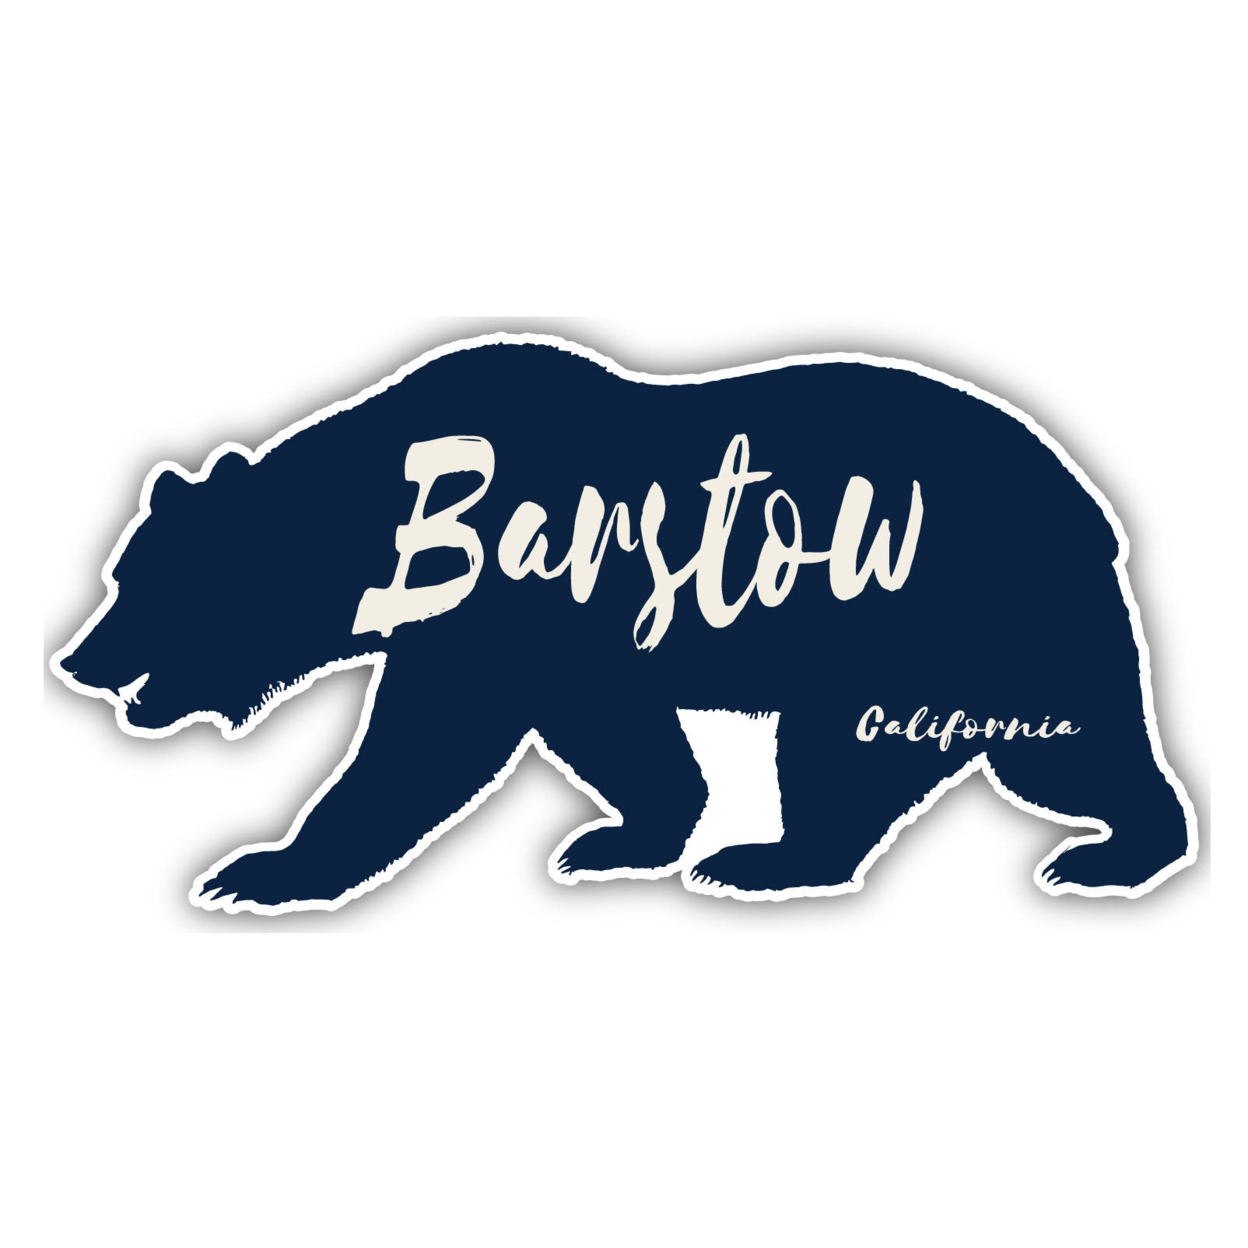 Barstow California Souvenir Decorative Stickers (Choose Theme And Size) - Single Unit, 4-Inch, Bear